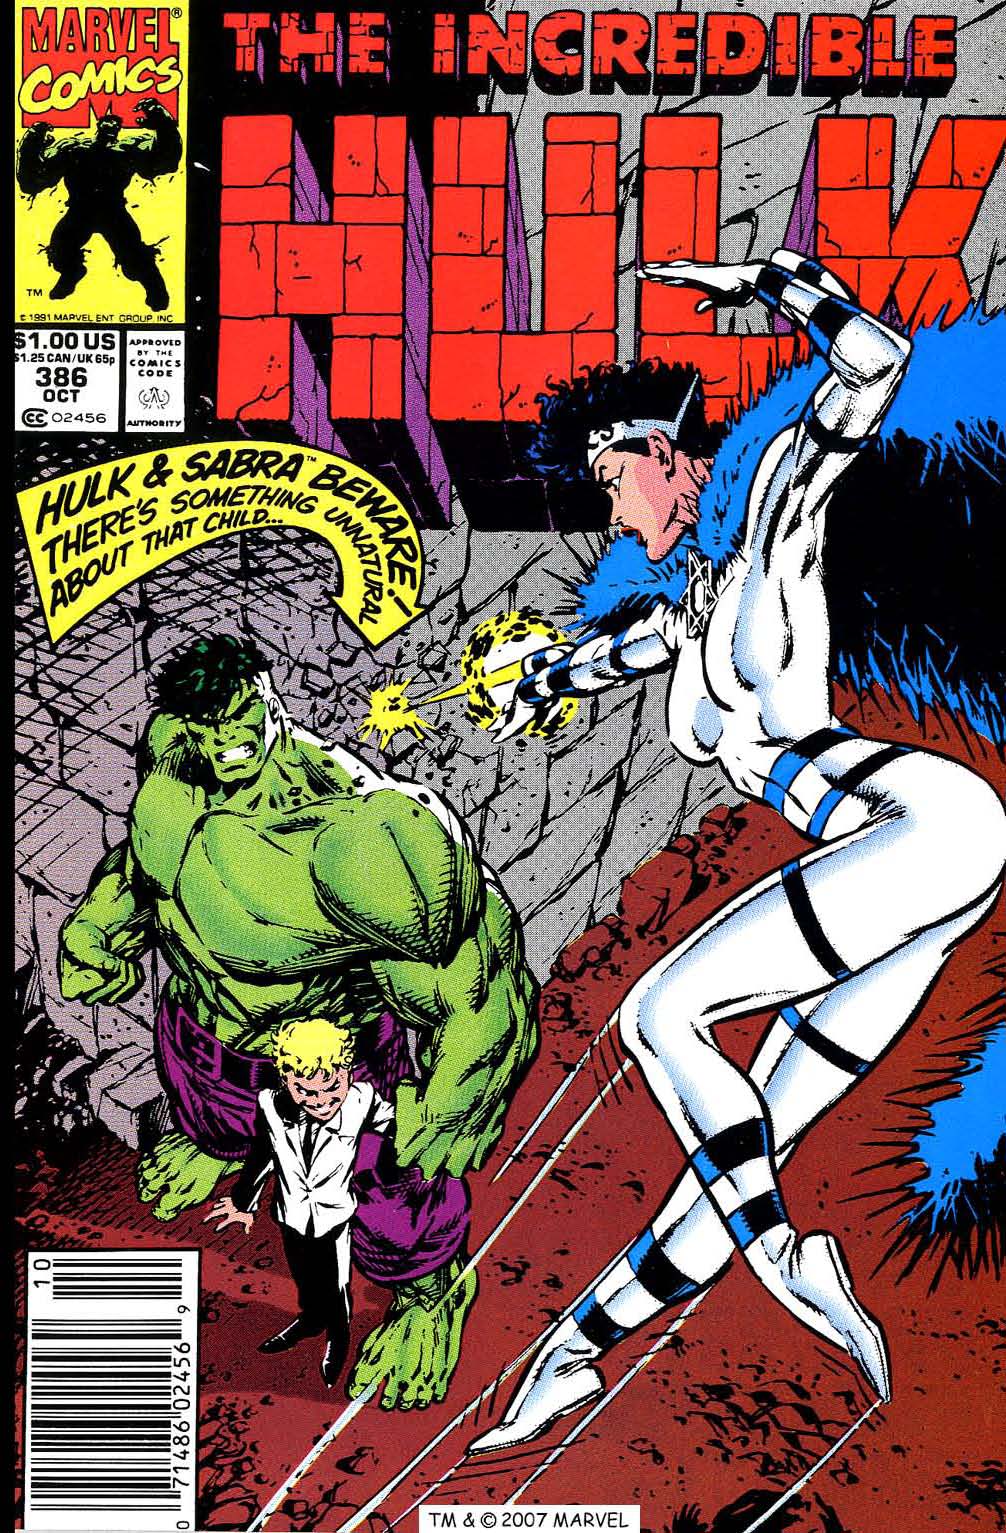 The Incredible Hulk Vol. 1 Issue #386 "Little Hitler" (1991), Marvel Comics. Words by Peter David. Art by Dale Keown, Mark Farmer, and Glynis Oliver.